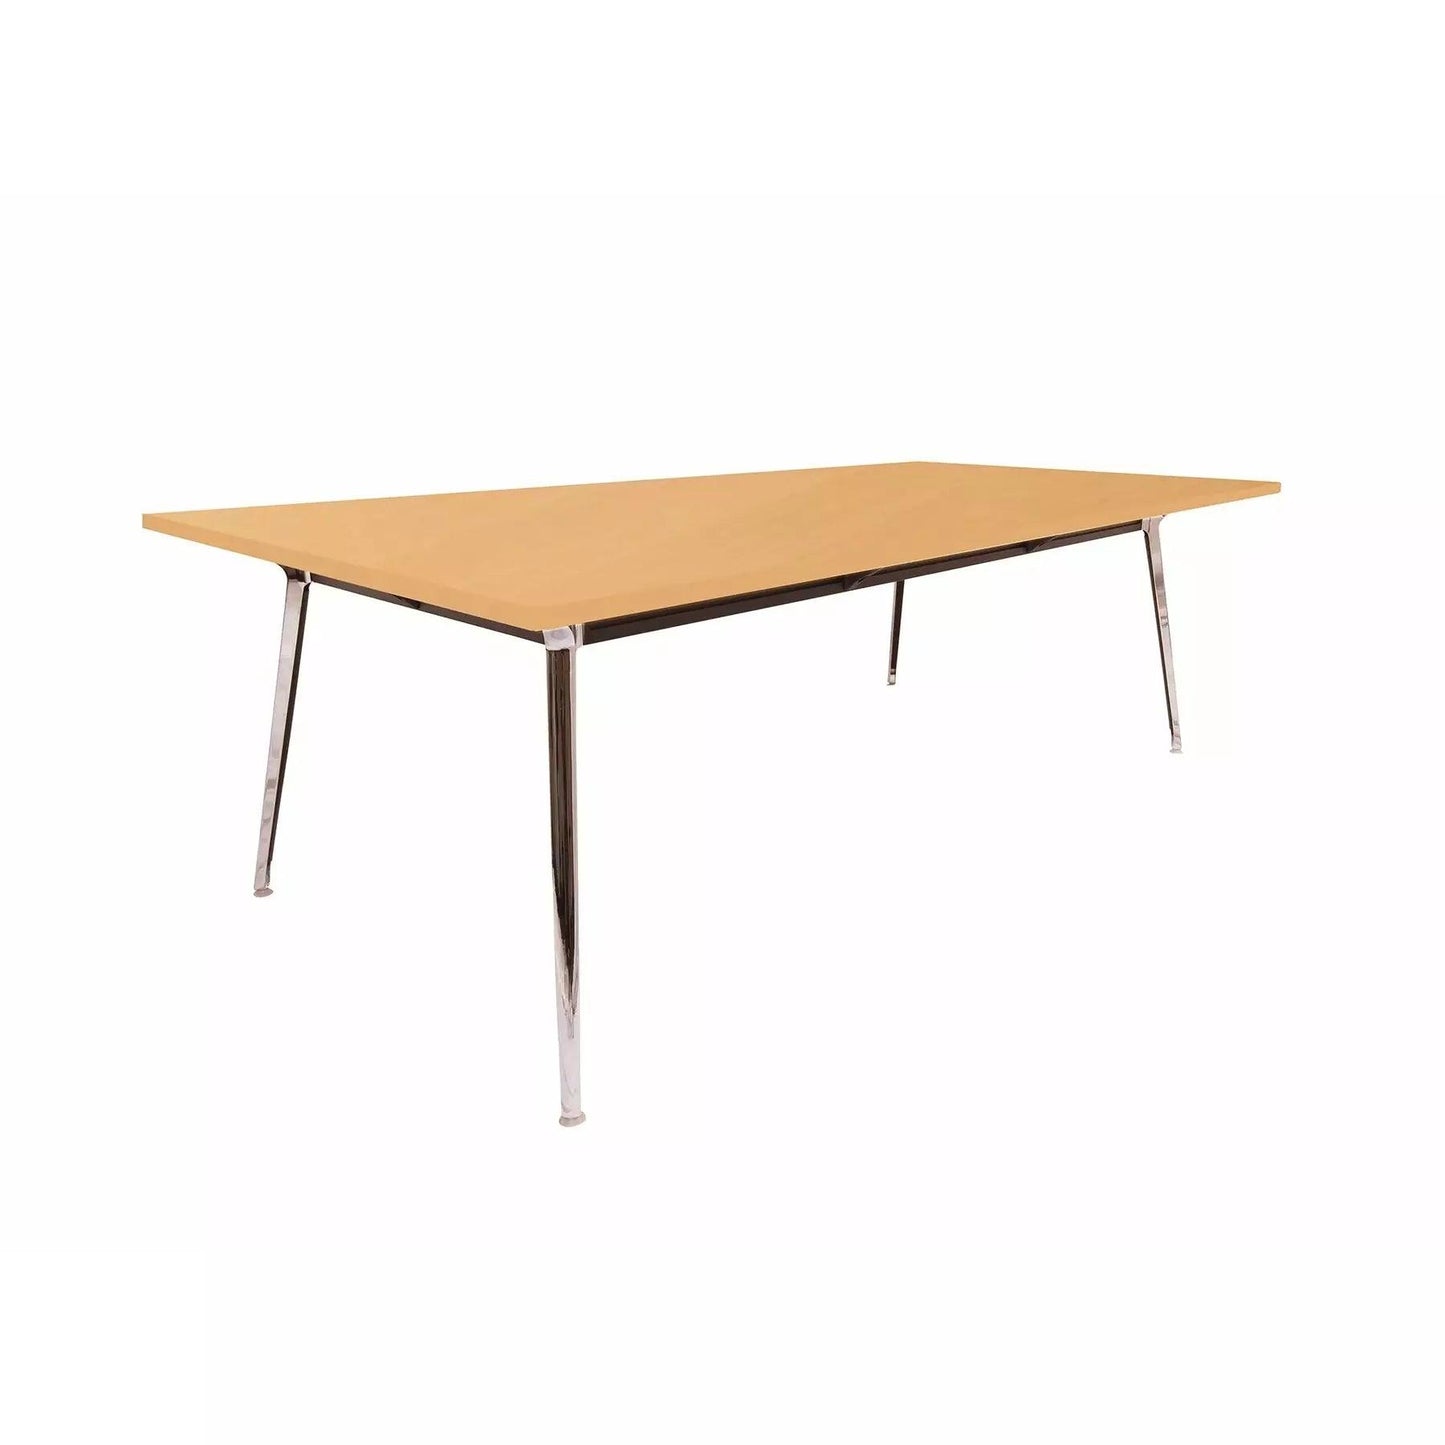 Rapid Air Meeting and Boardroom Tables - Office Furniture Company 